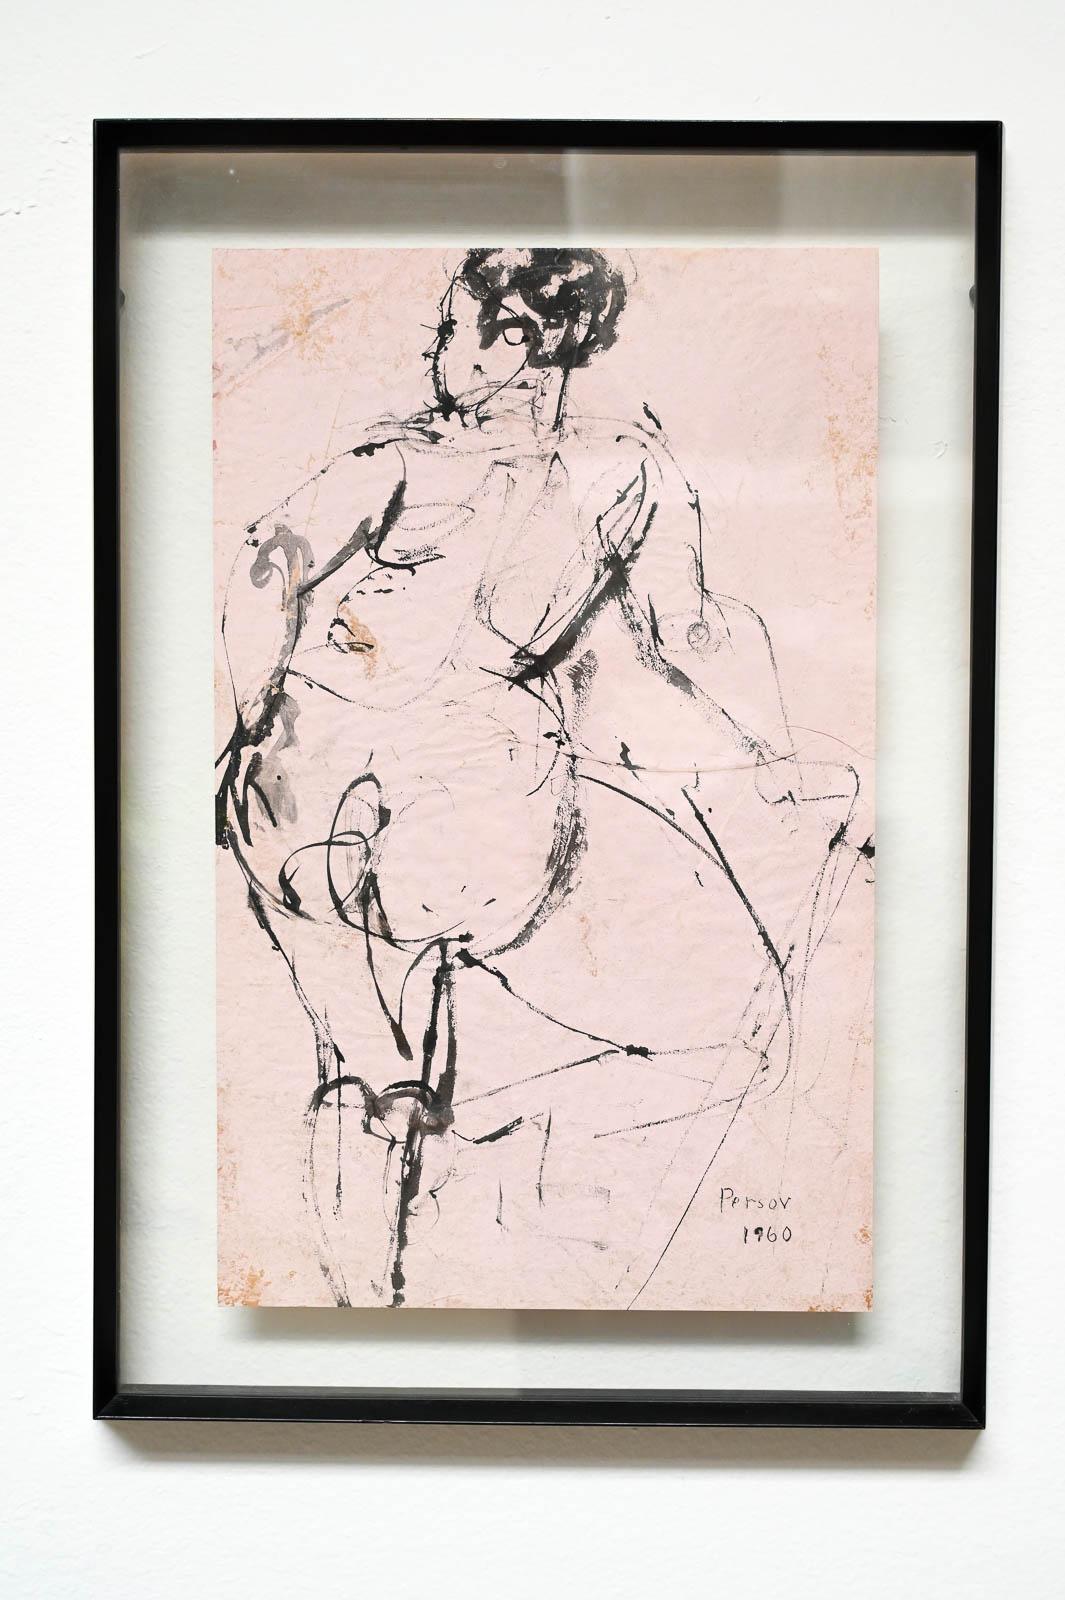 Figurative Etching by Ann Marie Persov, 1960.  Framed in original floating glass frame, this beautiful figurative aquatint etching is a great size for any intimate space.  Ms. Persov was a resident of Orange County, CA.

Measures 17